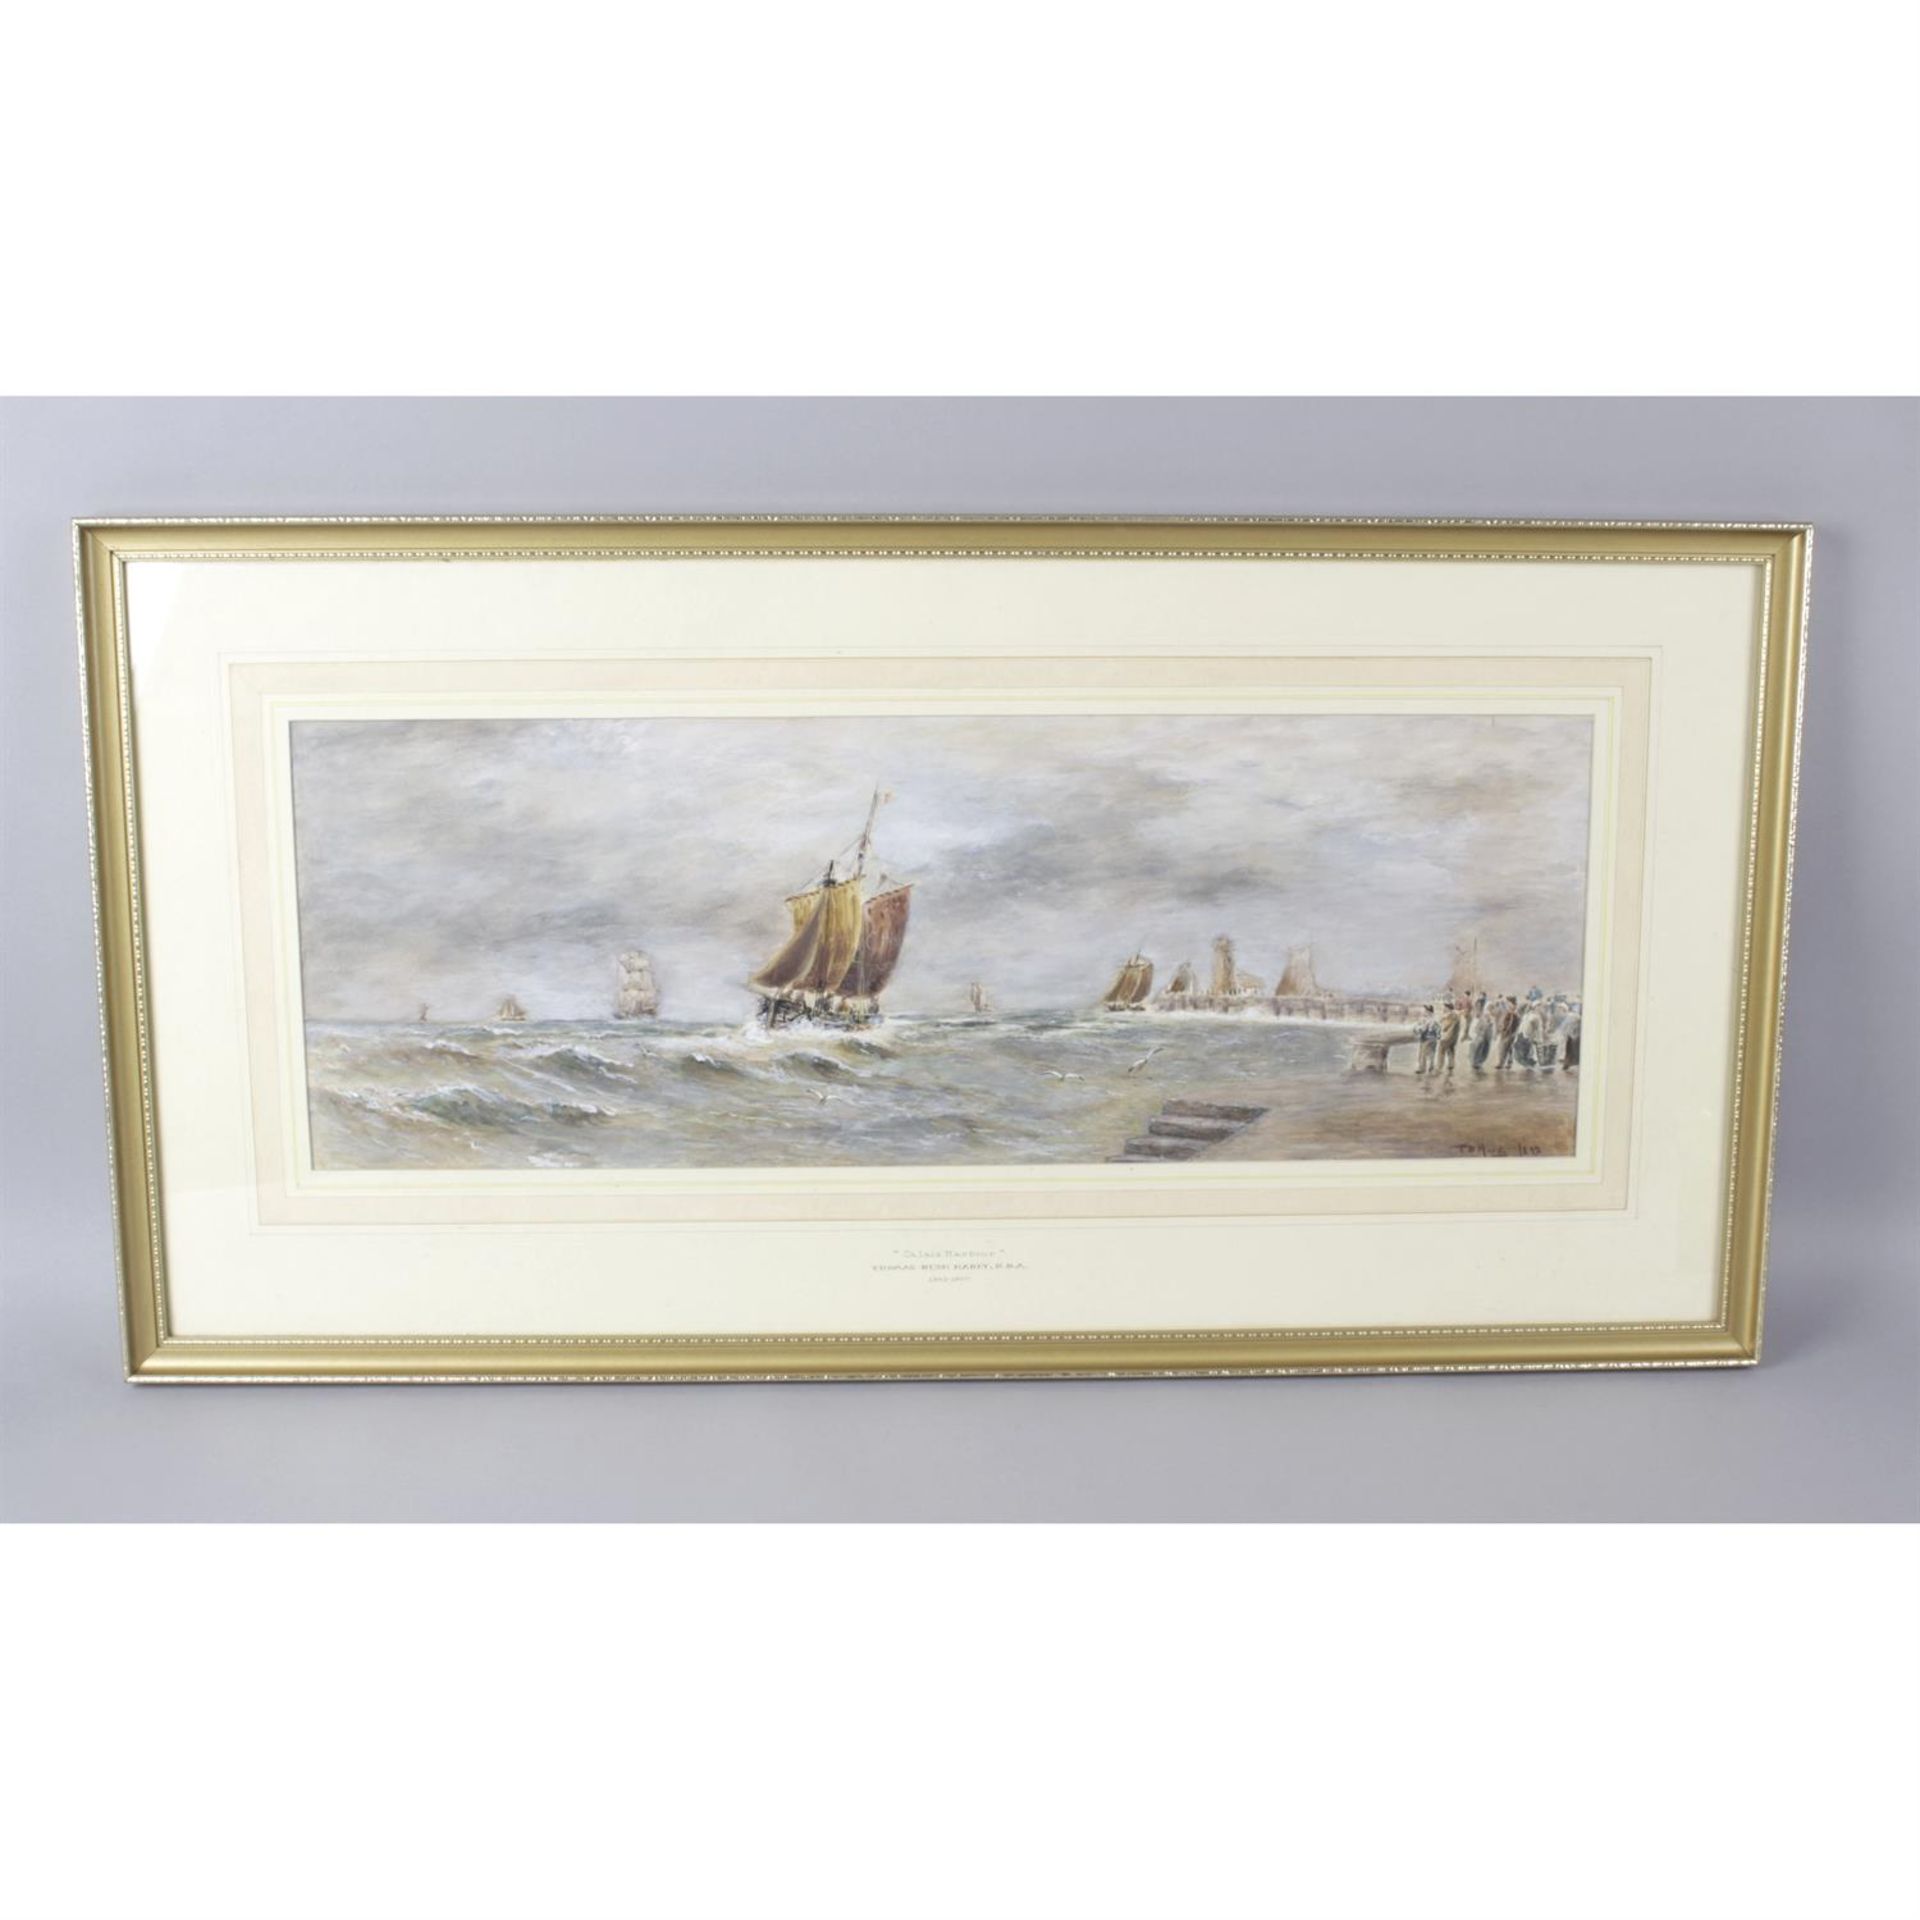 T. B Hardy (1842 - 1897), "Calais Harbour", signed watercolour - Image 2 of 3